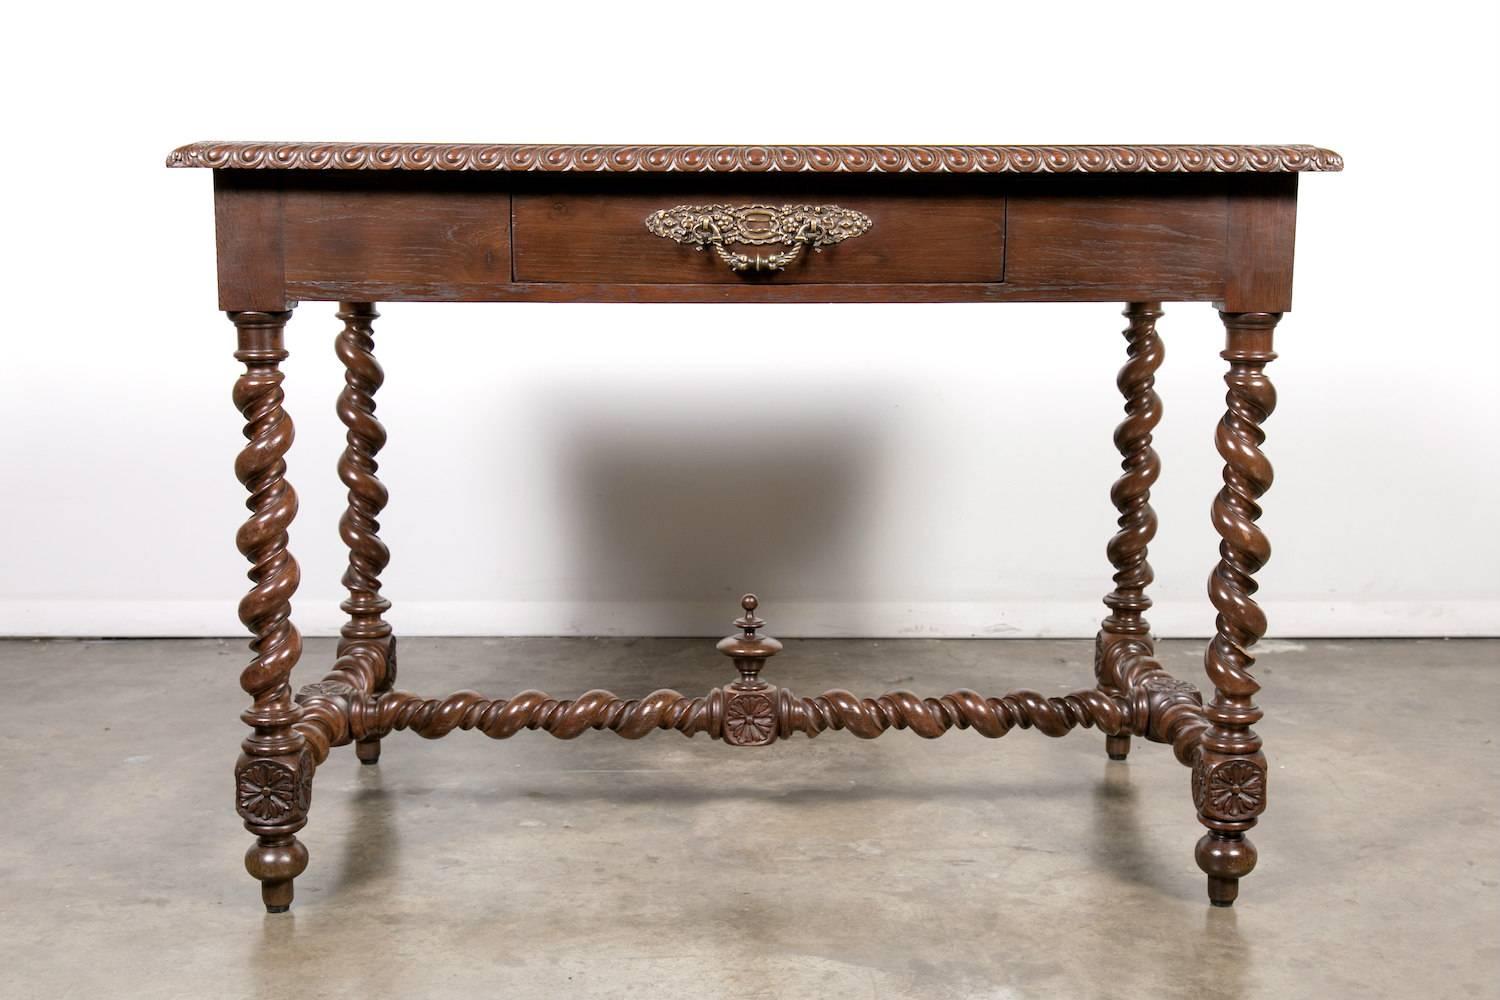 A fine 19th century French Louis XIII style writing table or bureau plat, having a rectangular top with a gadrooned beveled edge above a deep apron with a single drawer. This hand-carved solid oak desk is raised on four intricately hand-turned